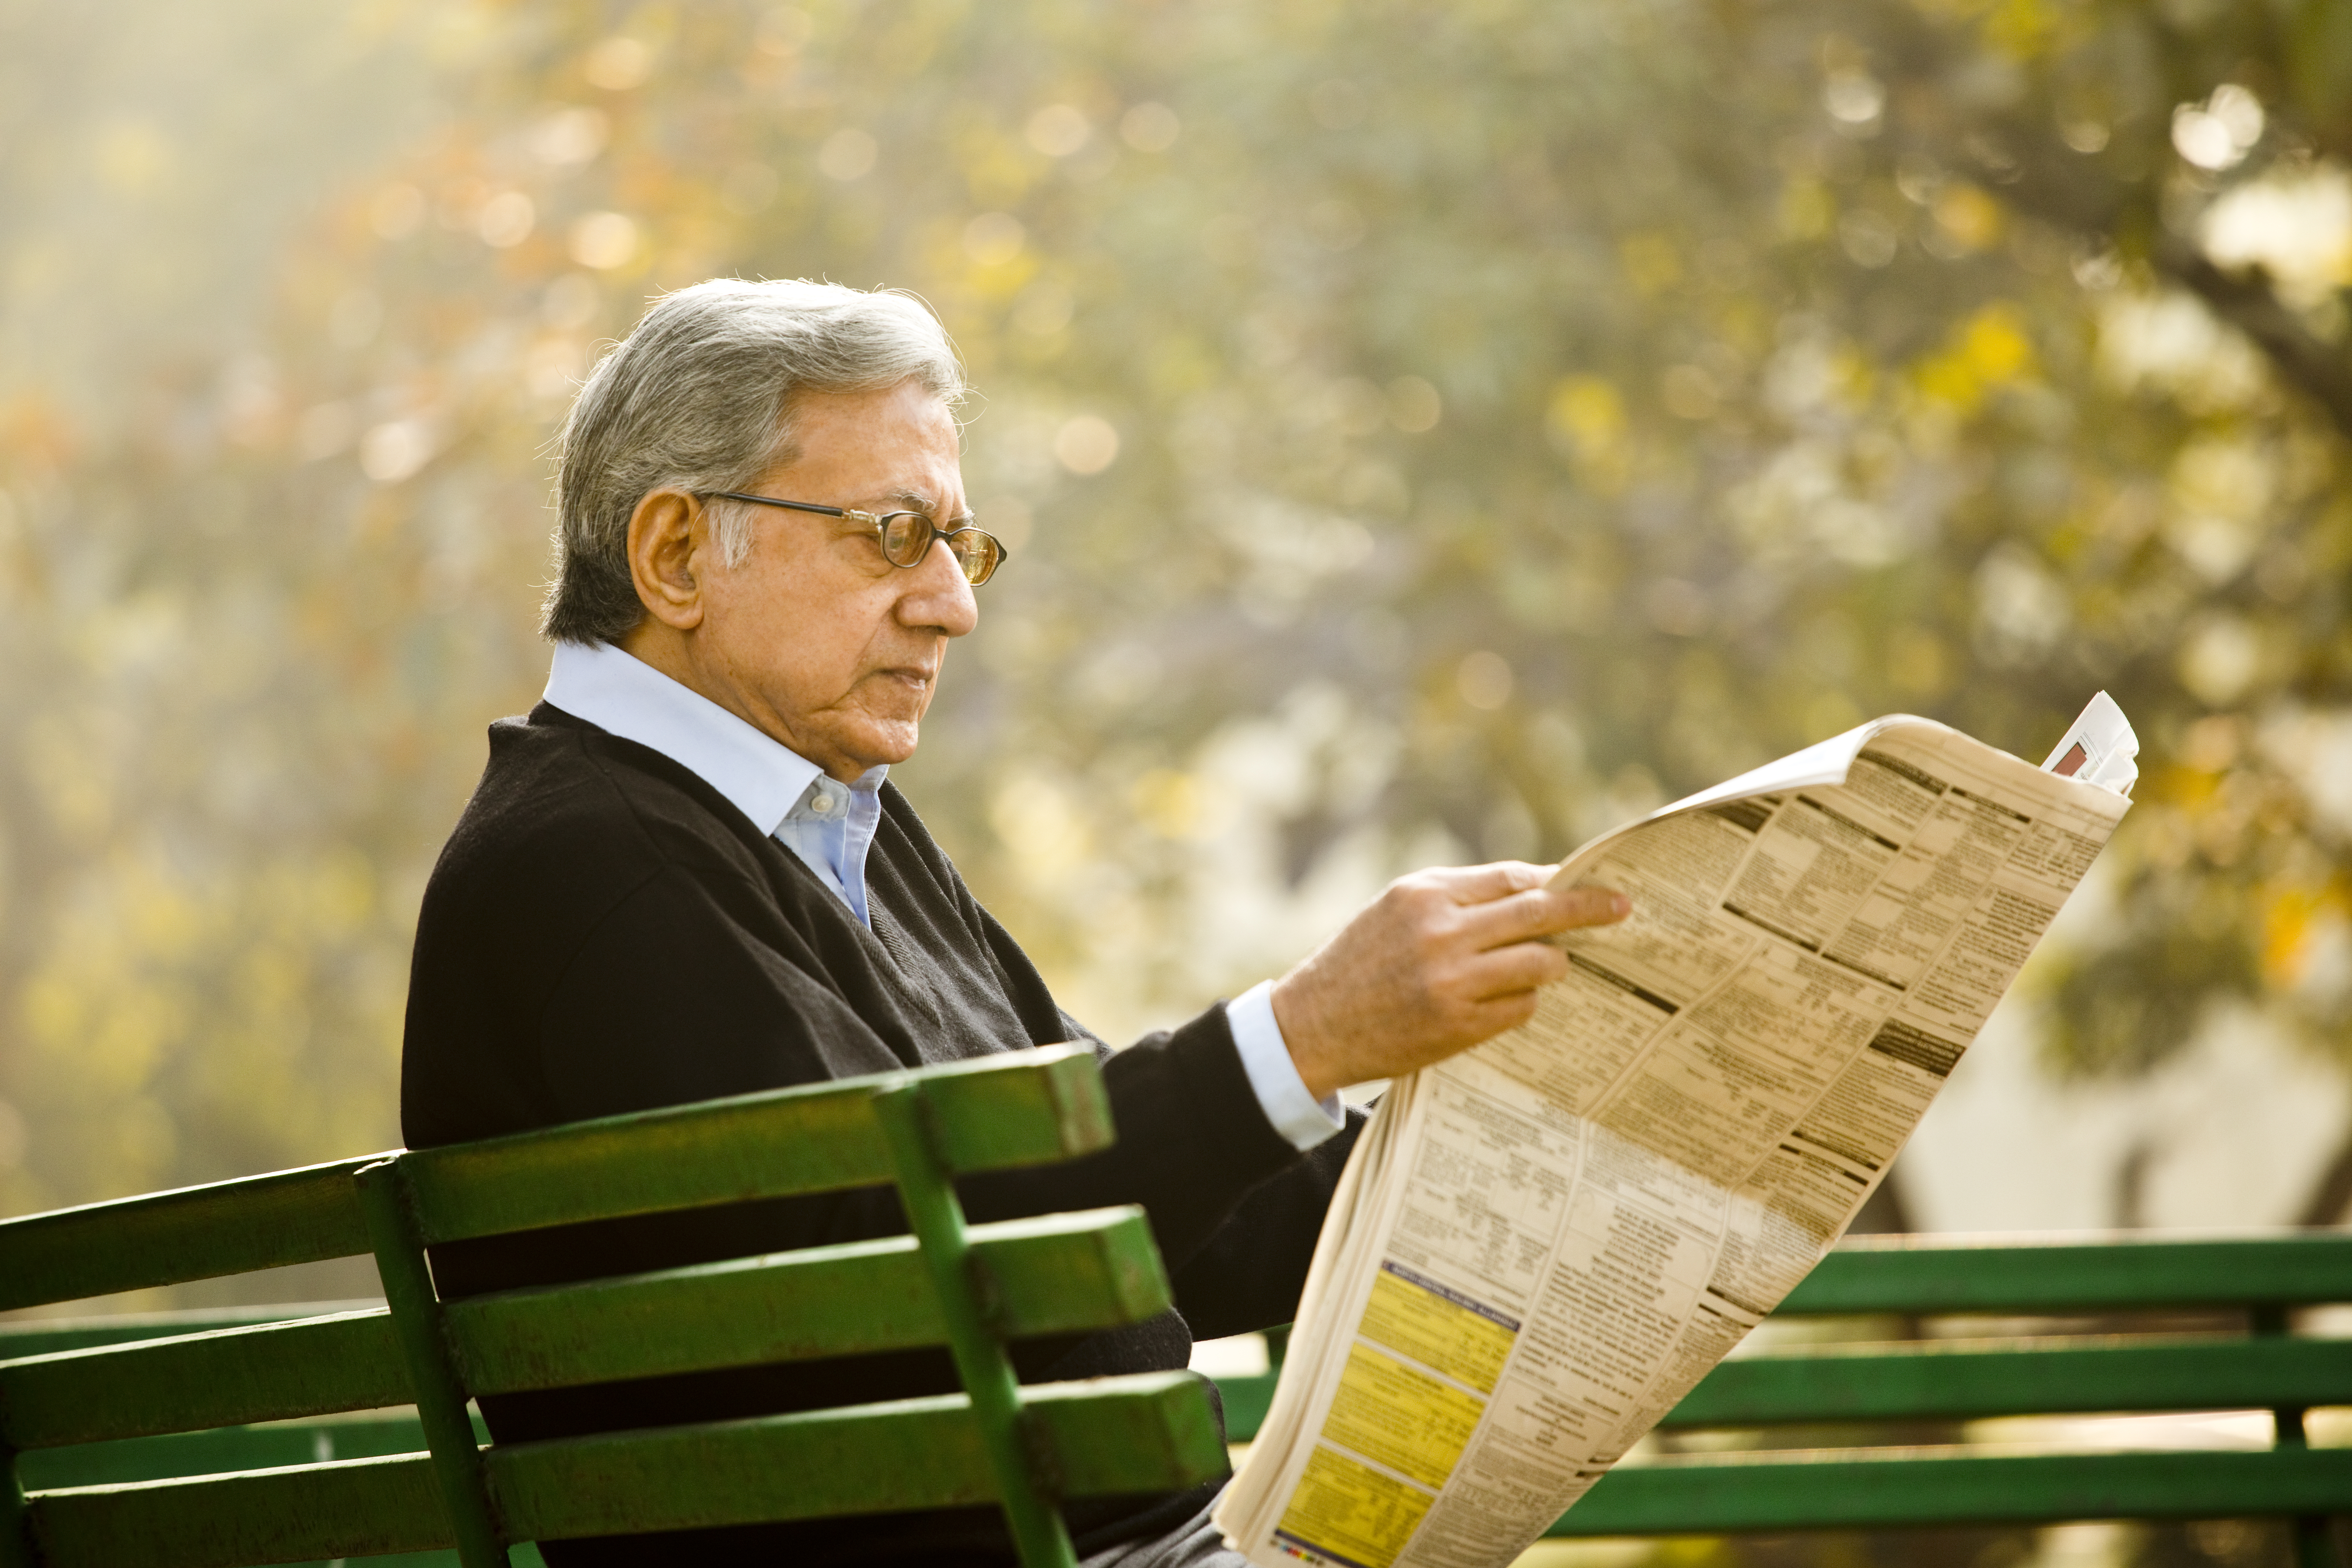 Older man sitting on bench and reading a newspaper in the park